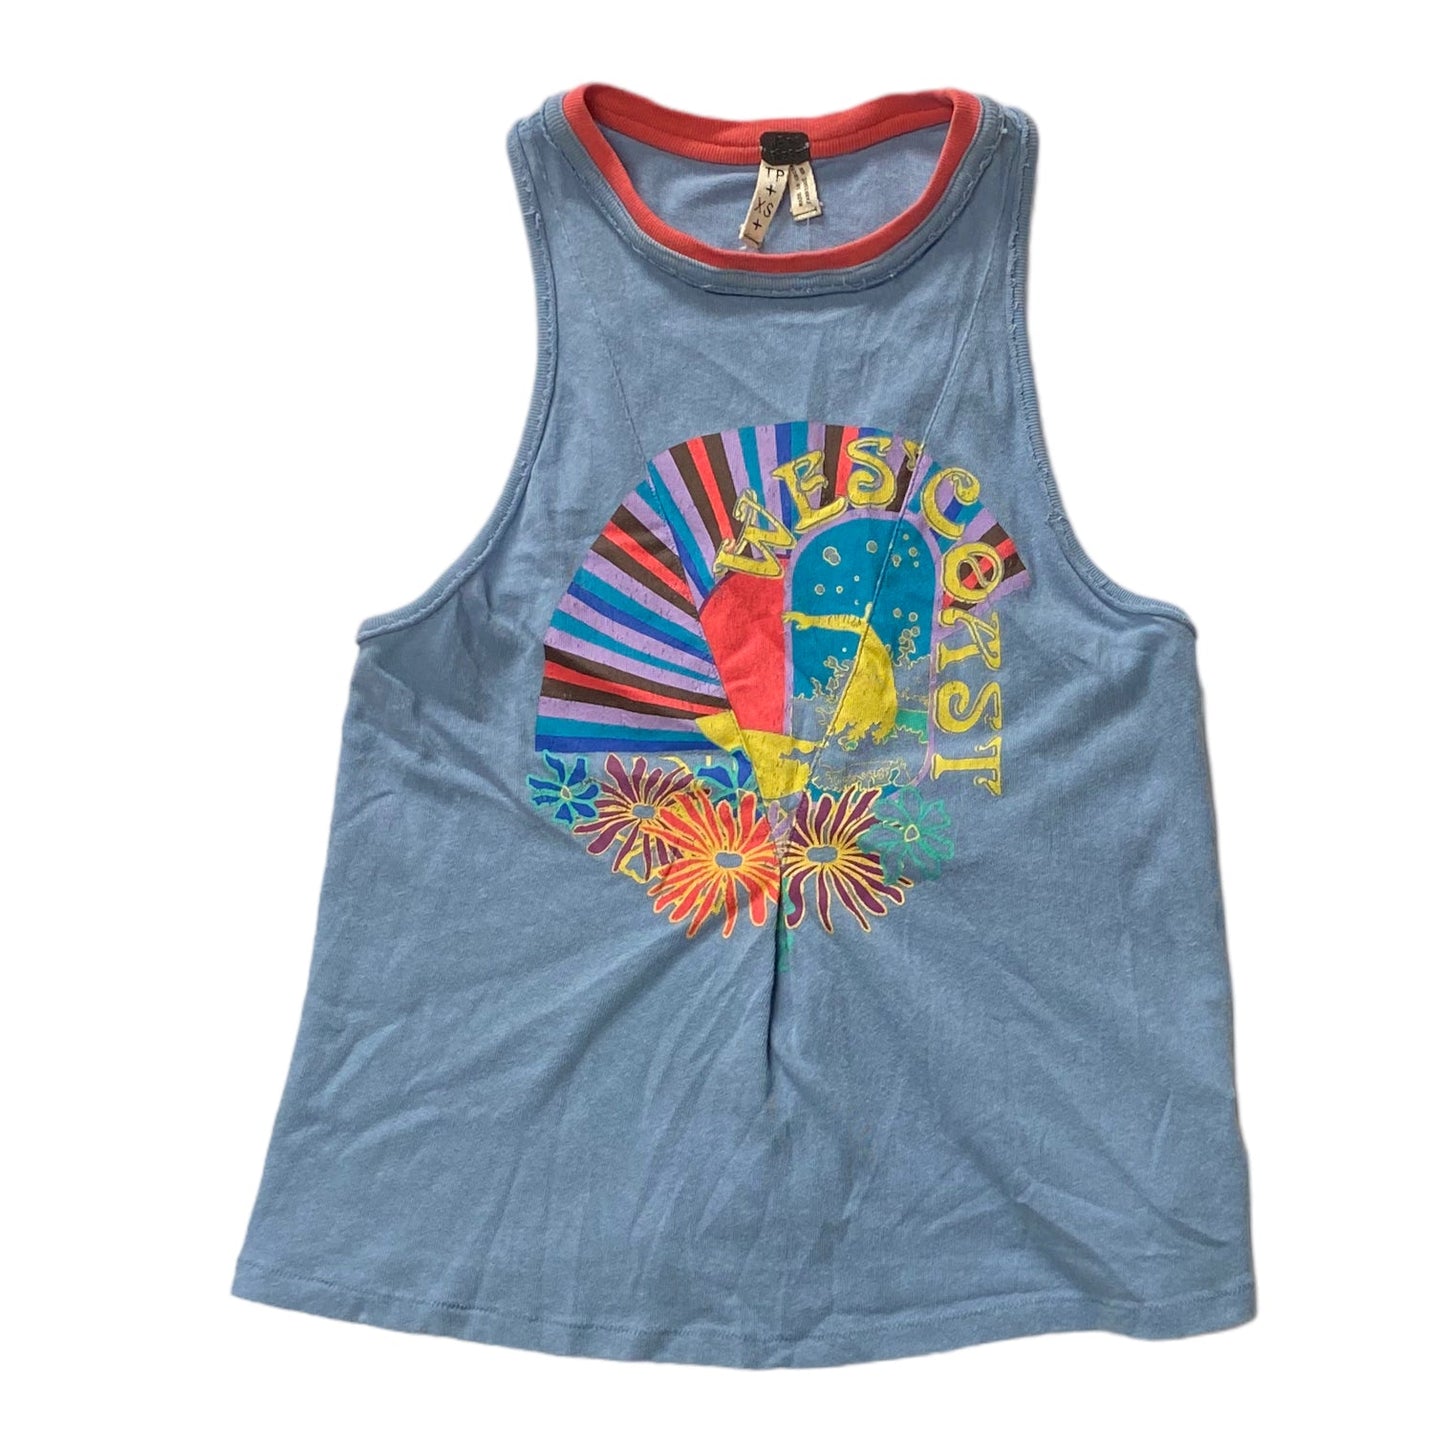 Multi-colored Top Sleeveless We The Free, Size Xs